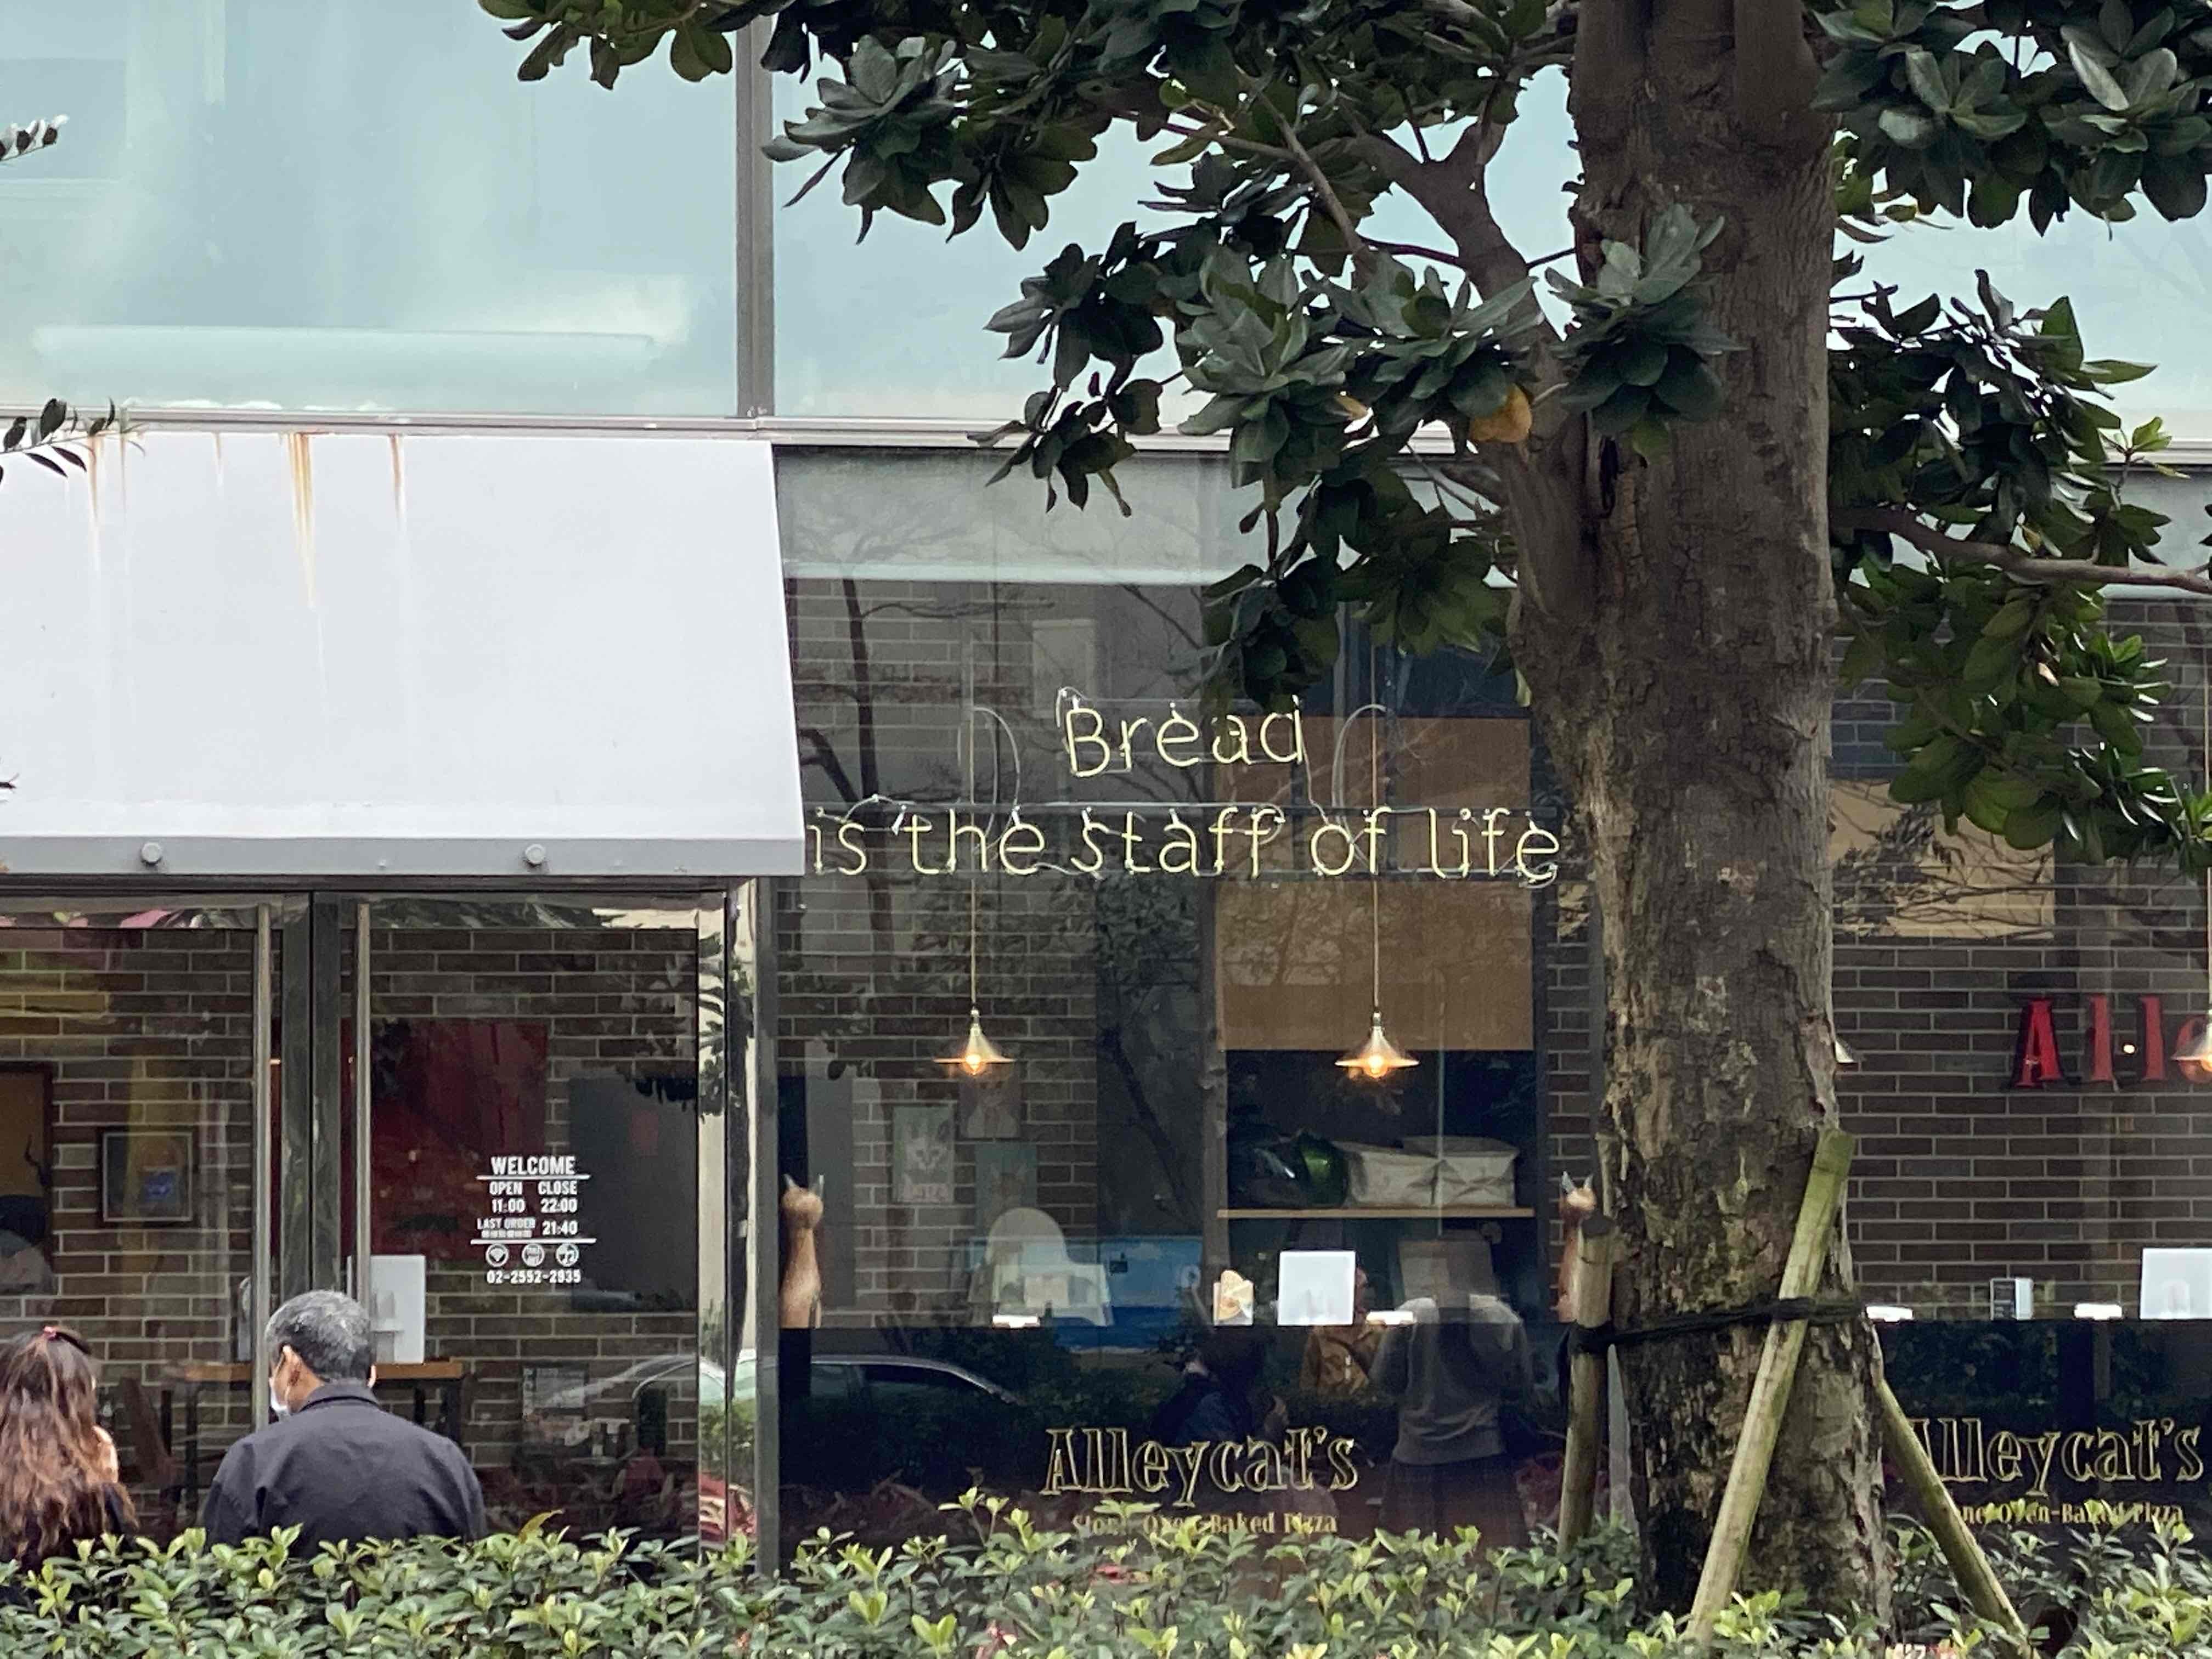 a picture of signage in the window of a cafe that says "bread (new line) is the staff of life". its clearly meant to say "staff" instead